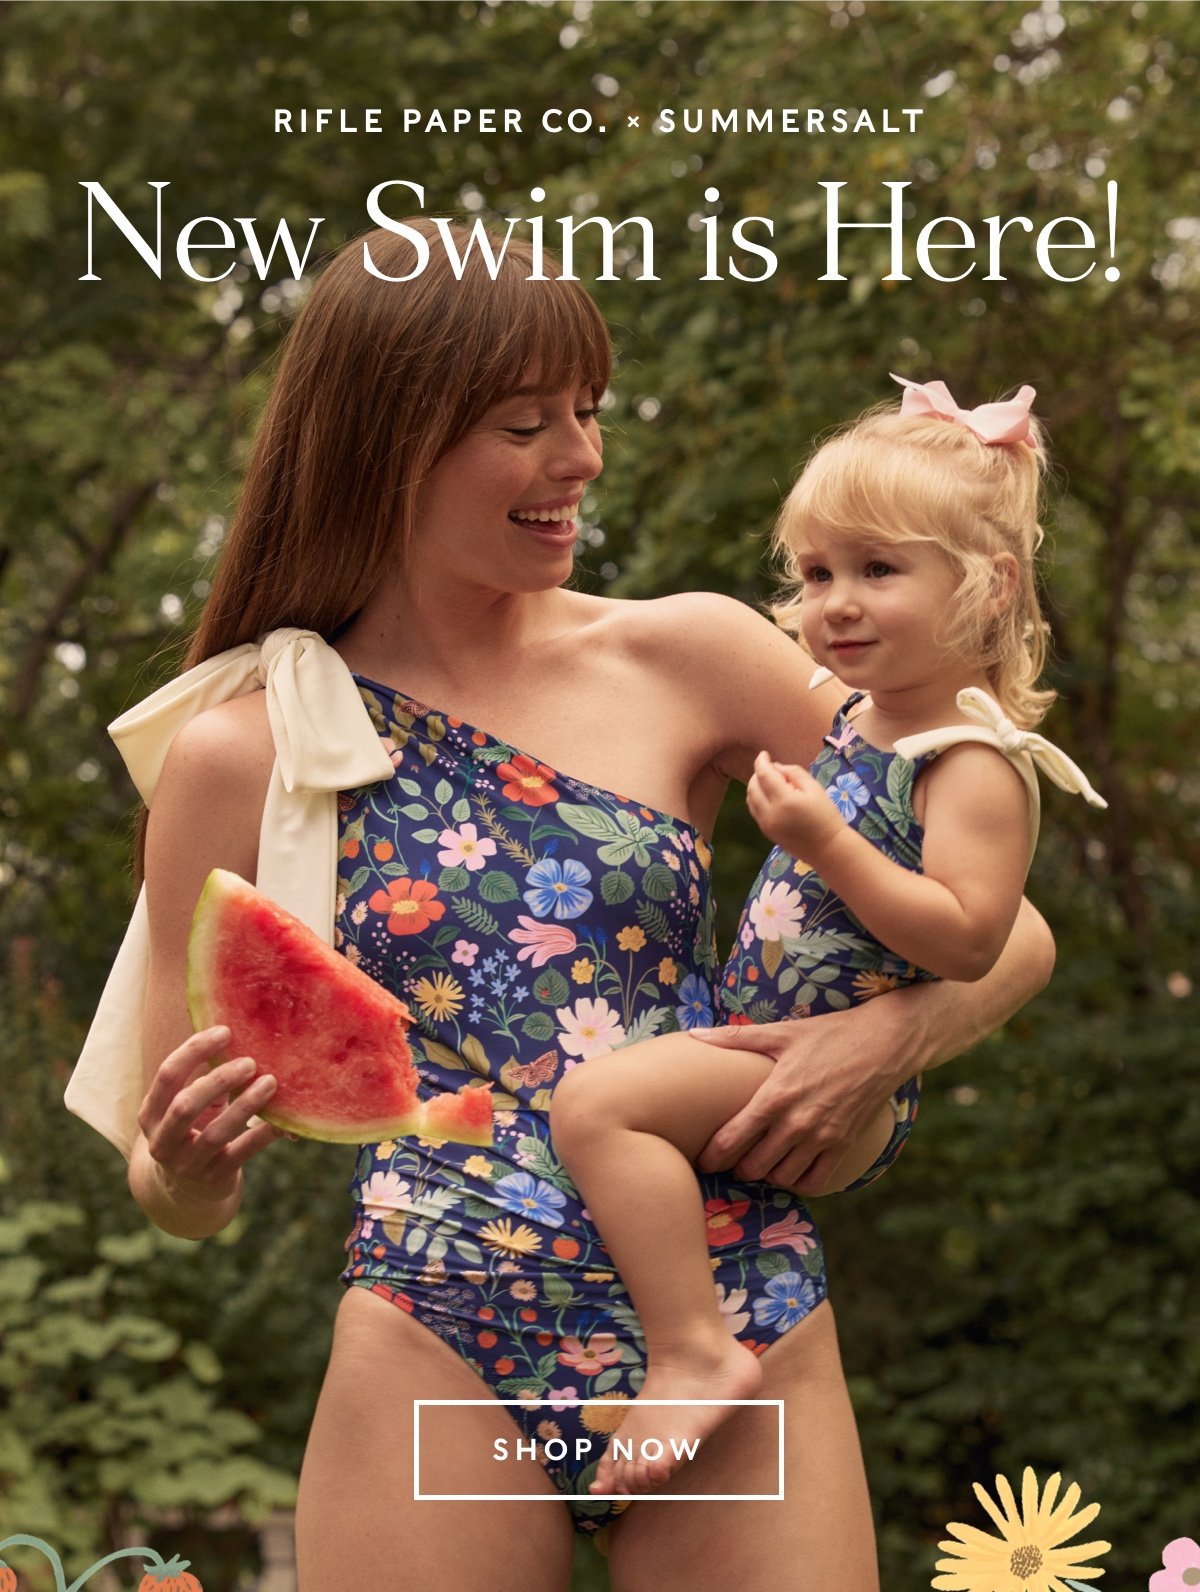 New swim is here. Shop now